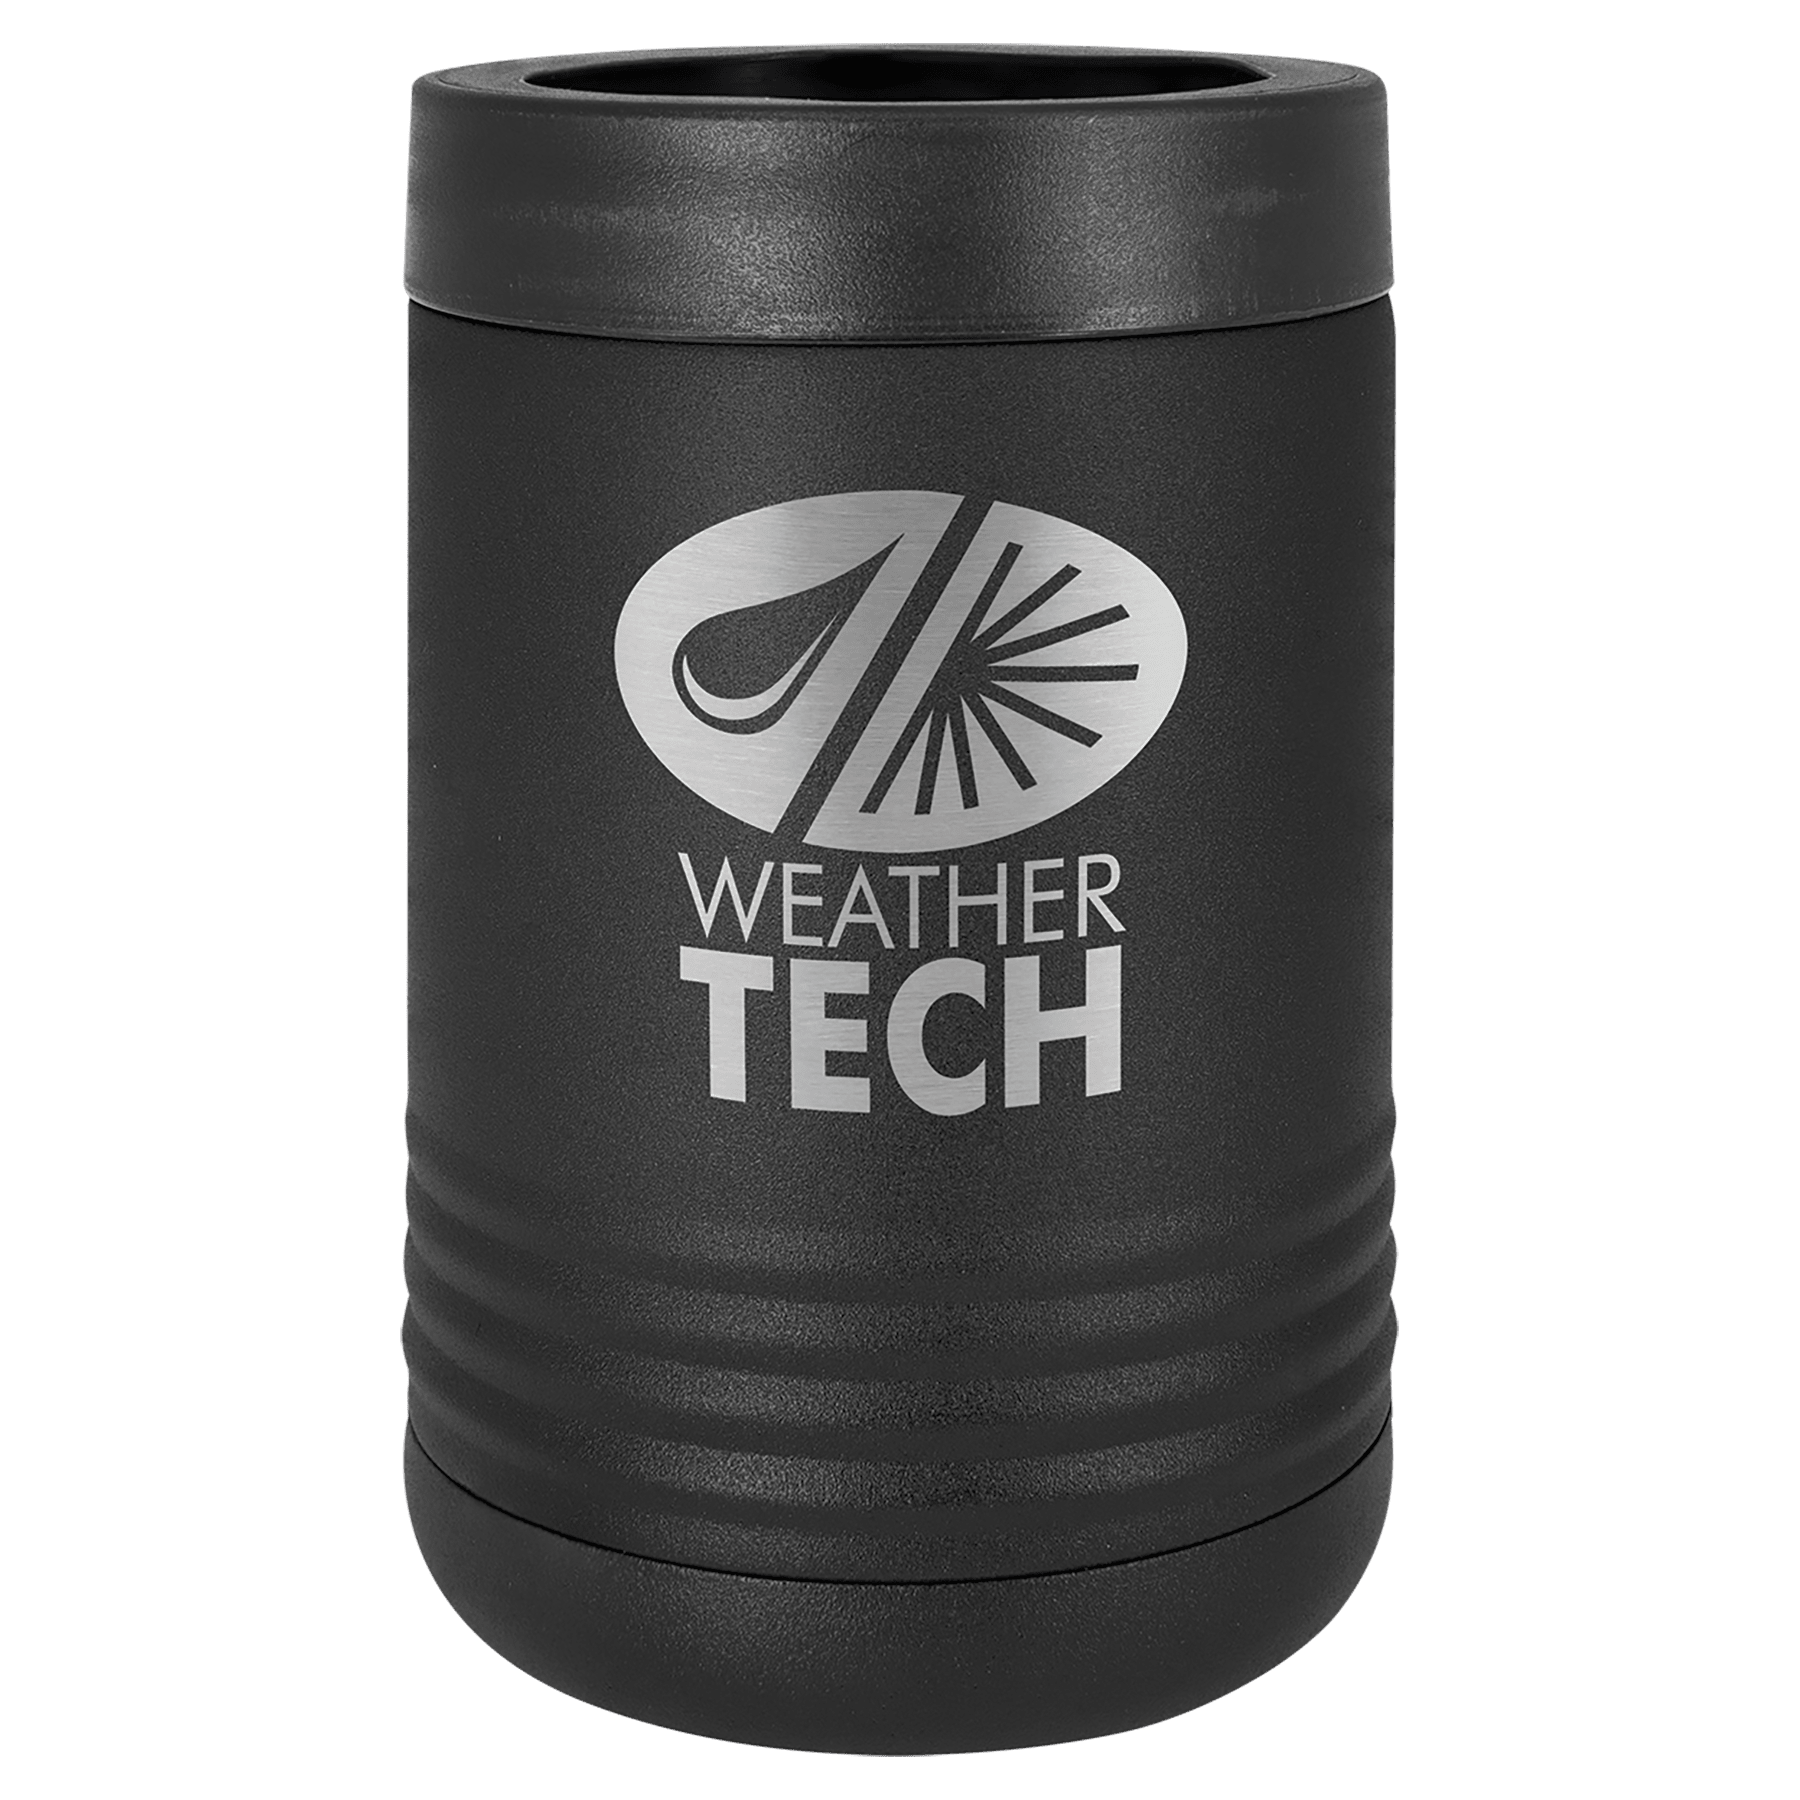 Ozark Trail 12oz Vacuum Insulated Stainless Steel Can Cooler with